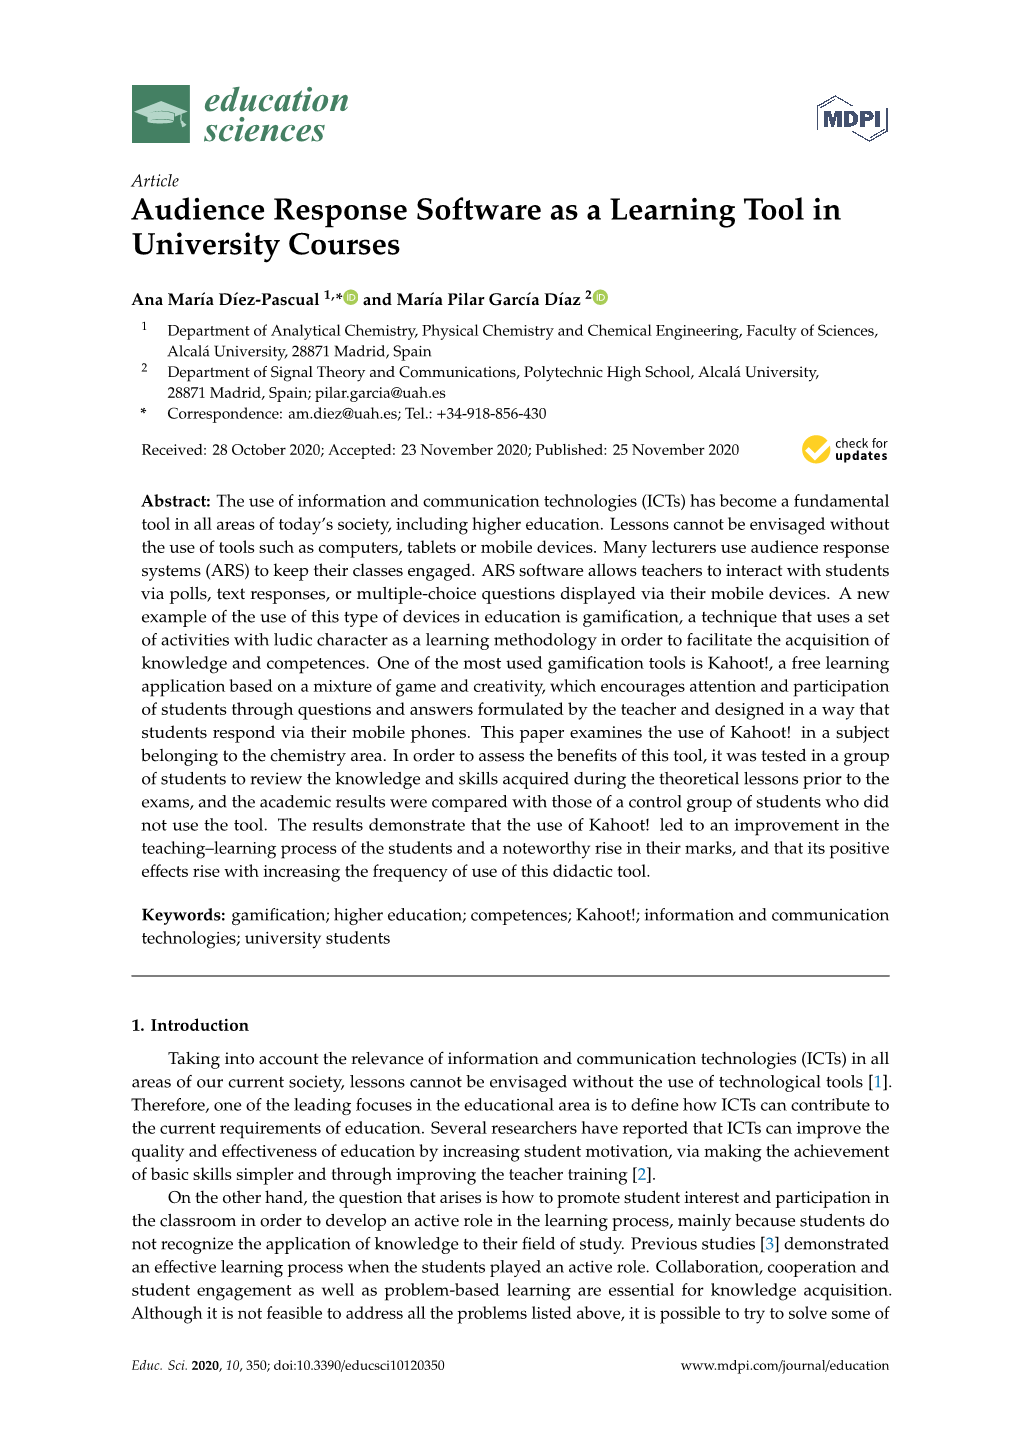 Audience Response Software As a Learning Tool in University Courses